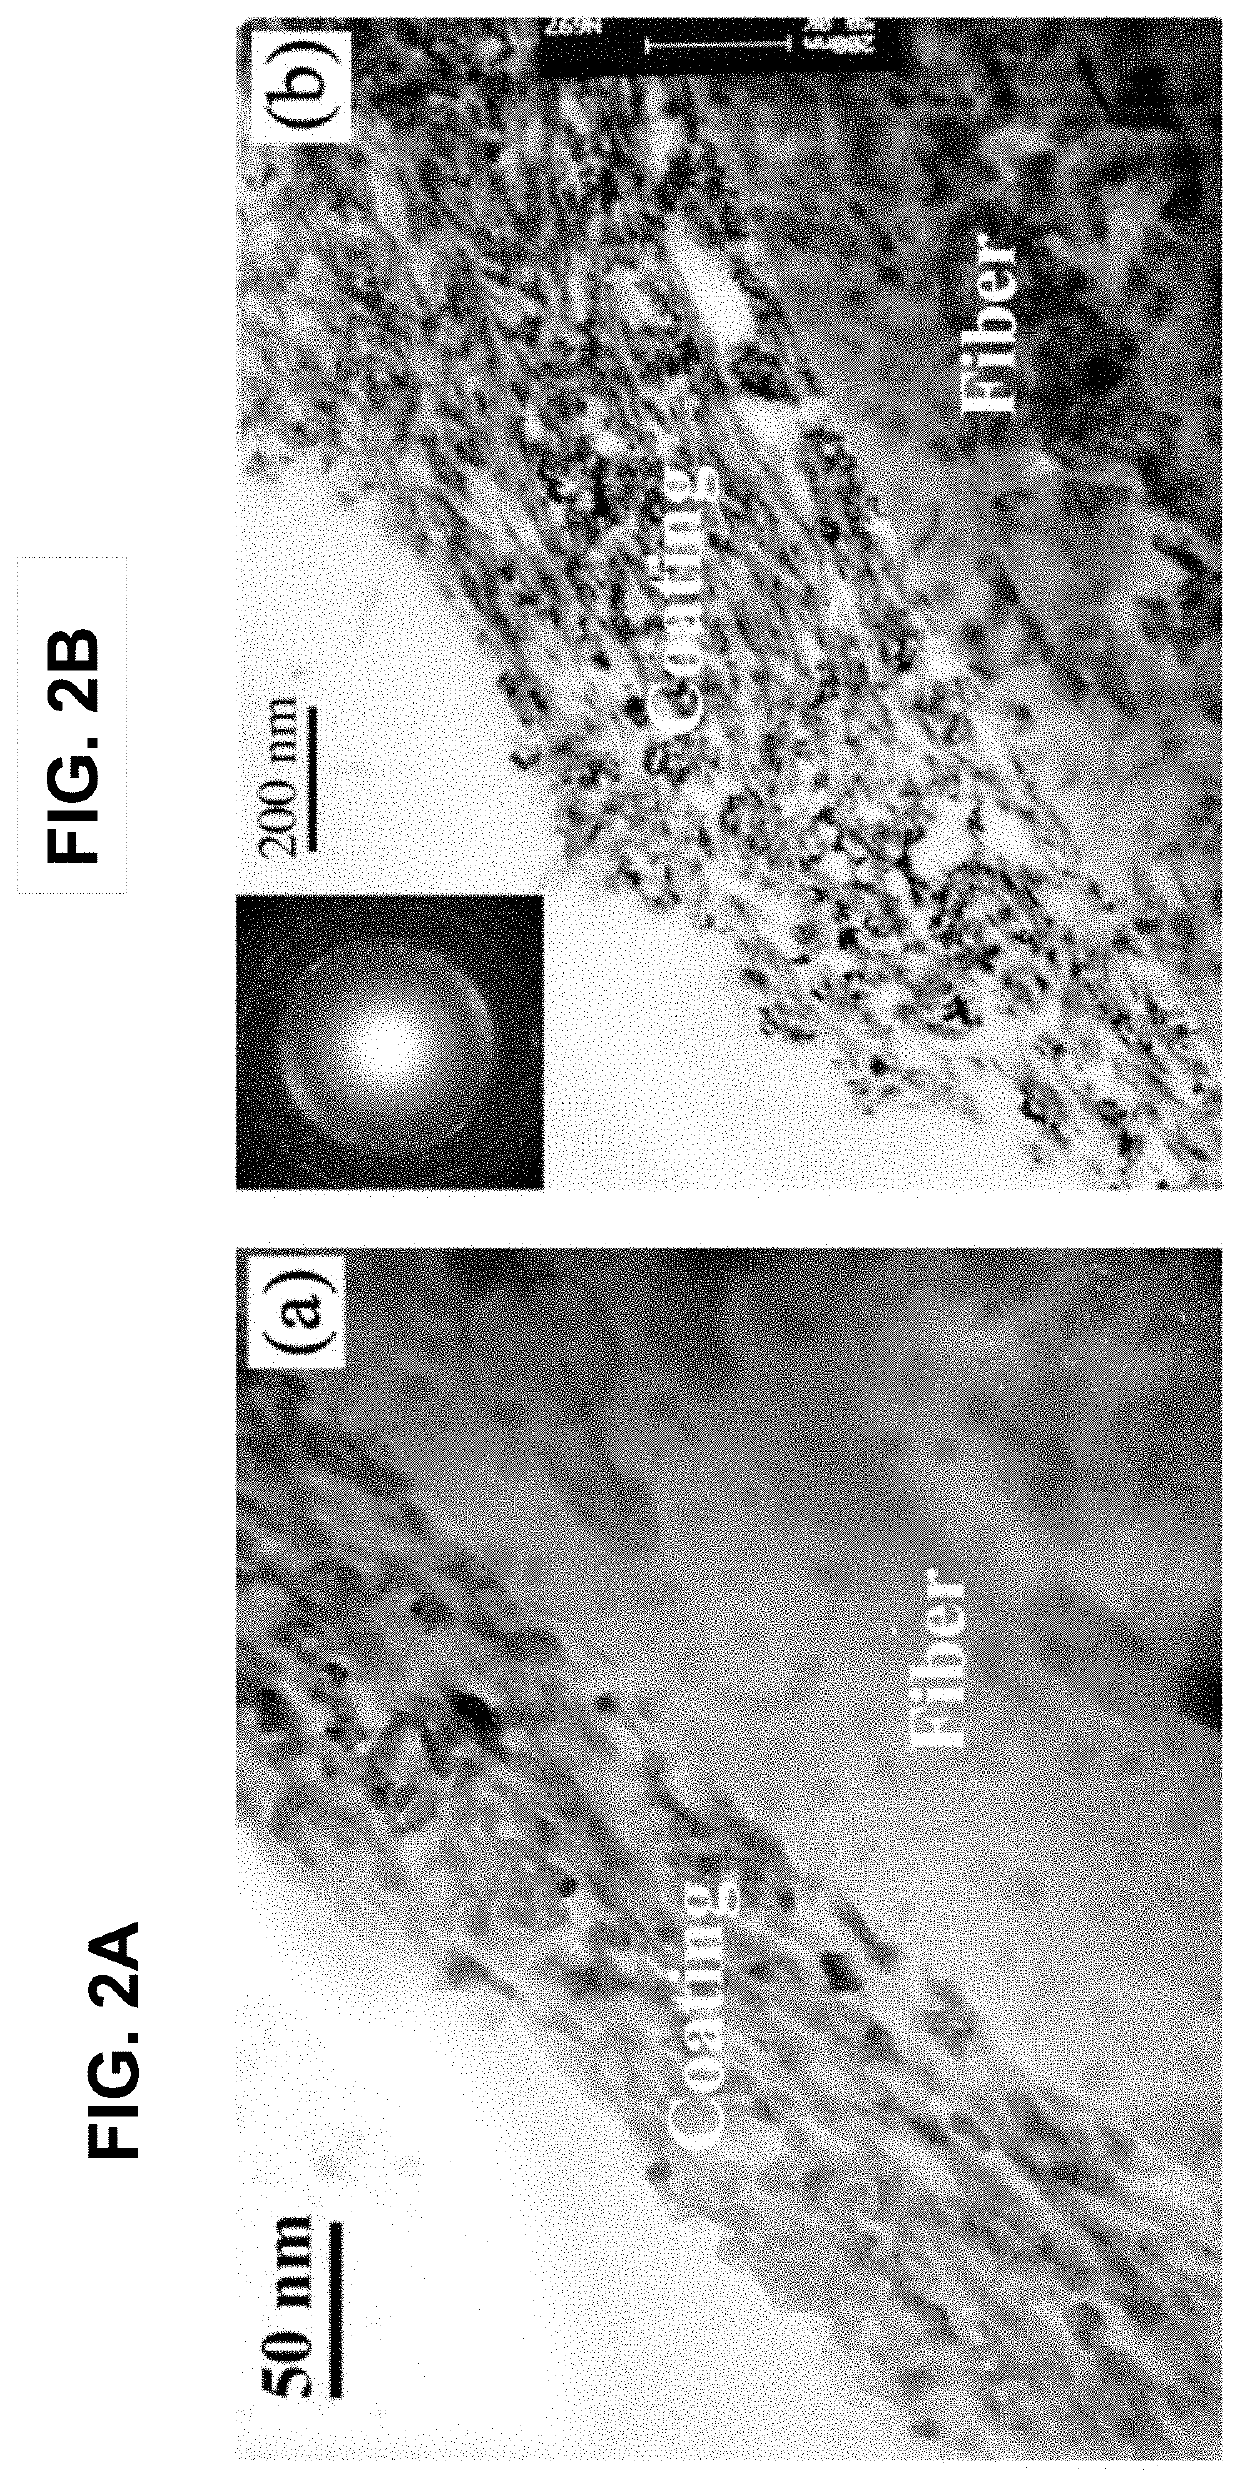 Oxidation-resistant fiber coatings and related methods